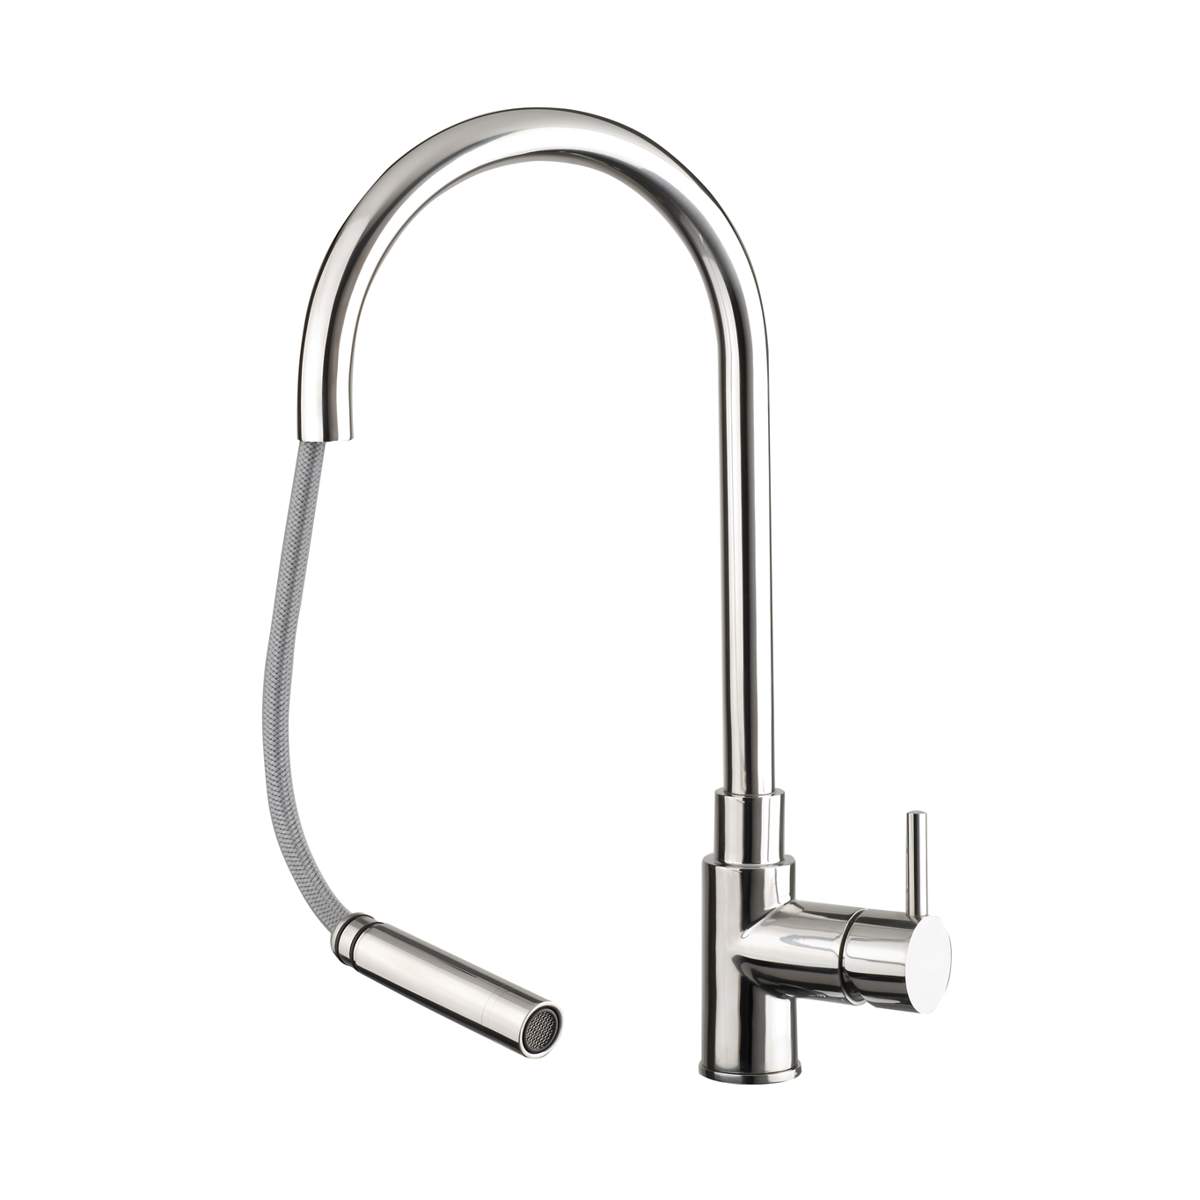 JTP Zecca Stainless Steel Pull-Out Sink Mixer (ZAS181)